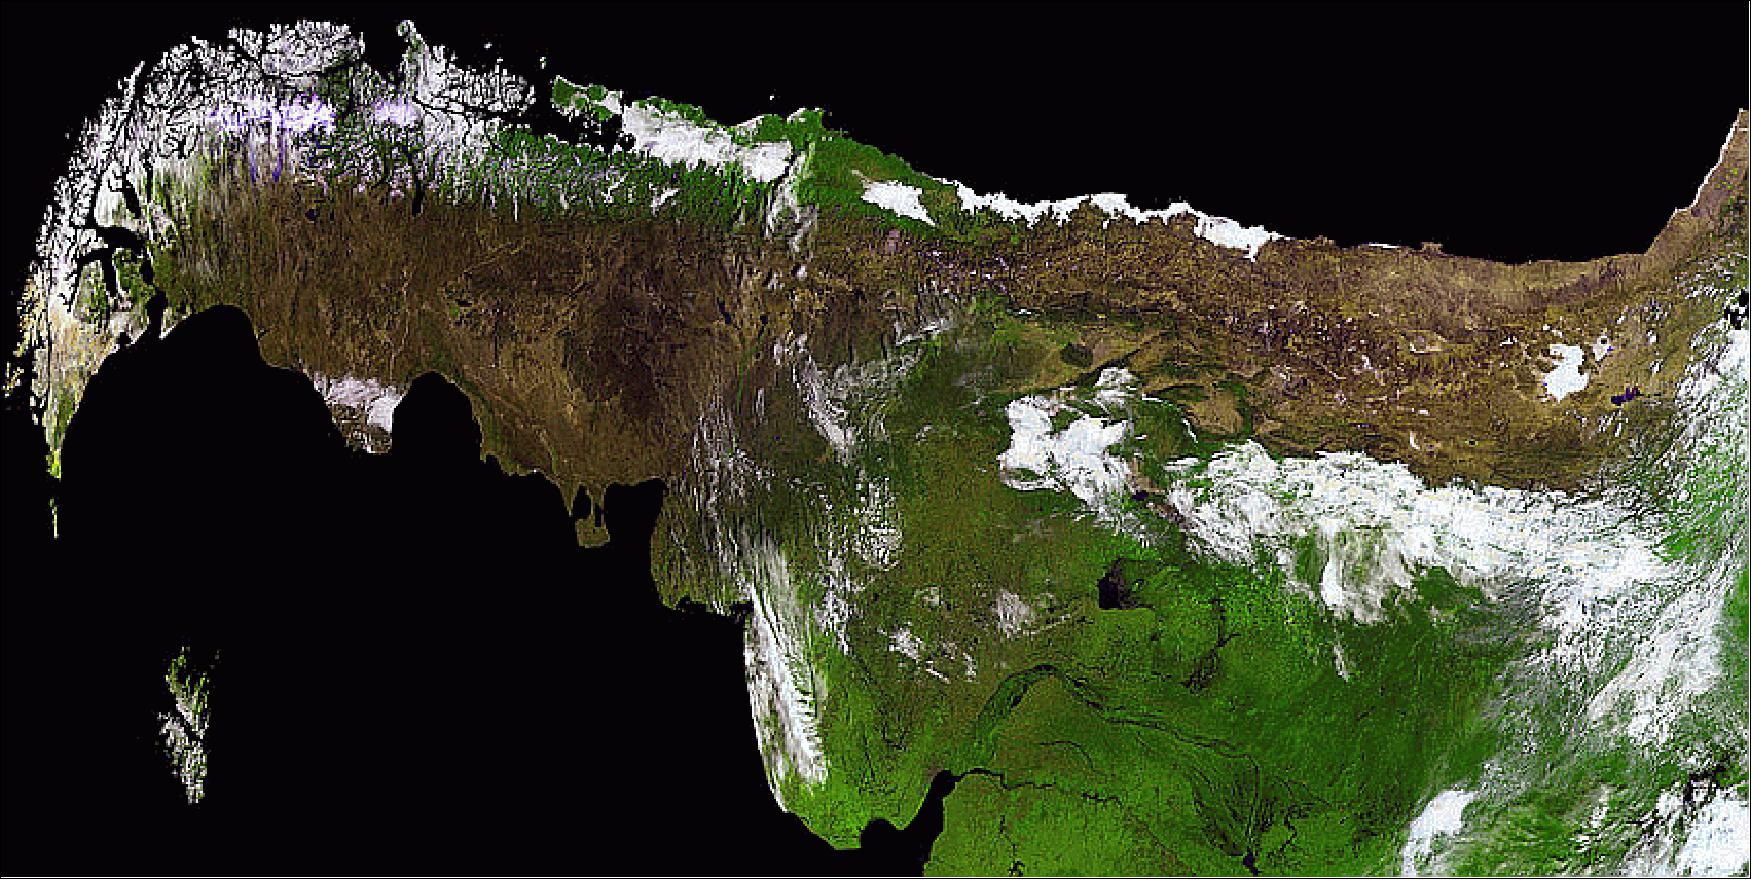 Figure 58: An unusual view of South America and the Andes mountains, acquired by PROBA-V on April 23, 2014 (image credit: ESA, VITO)